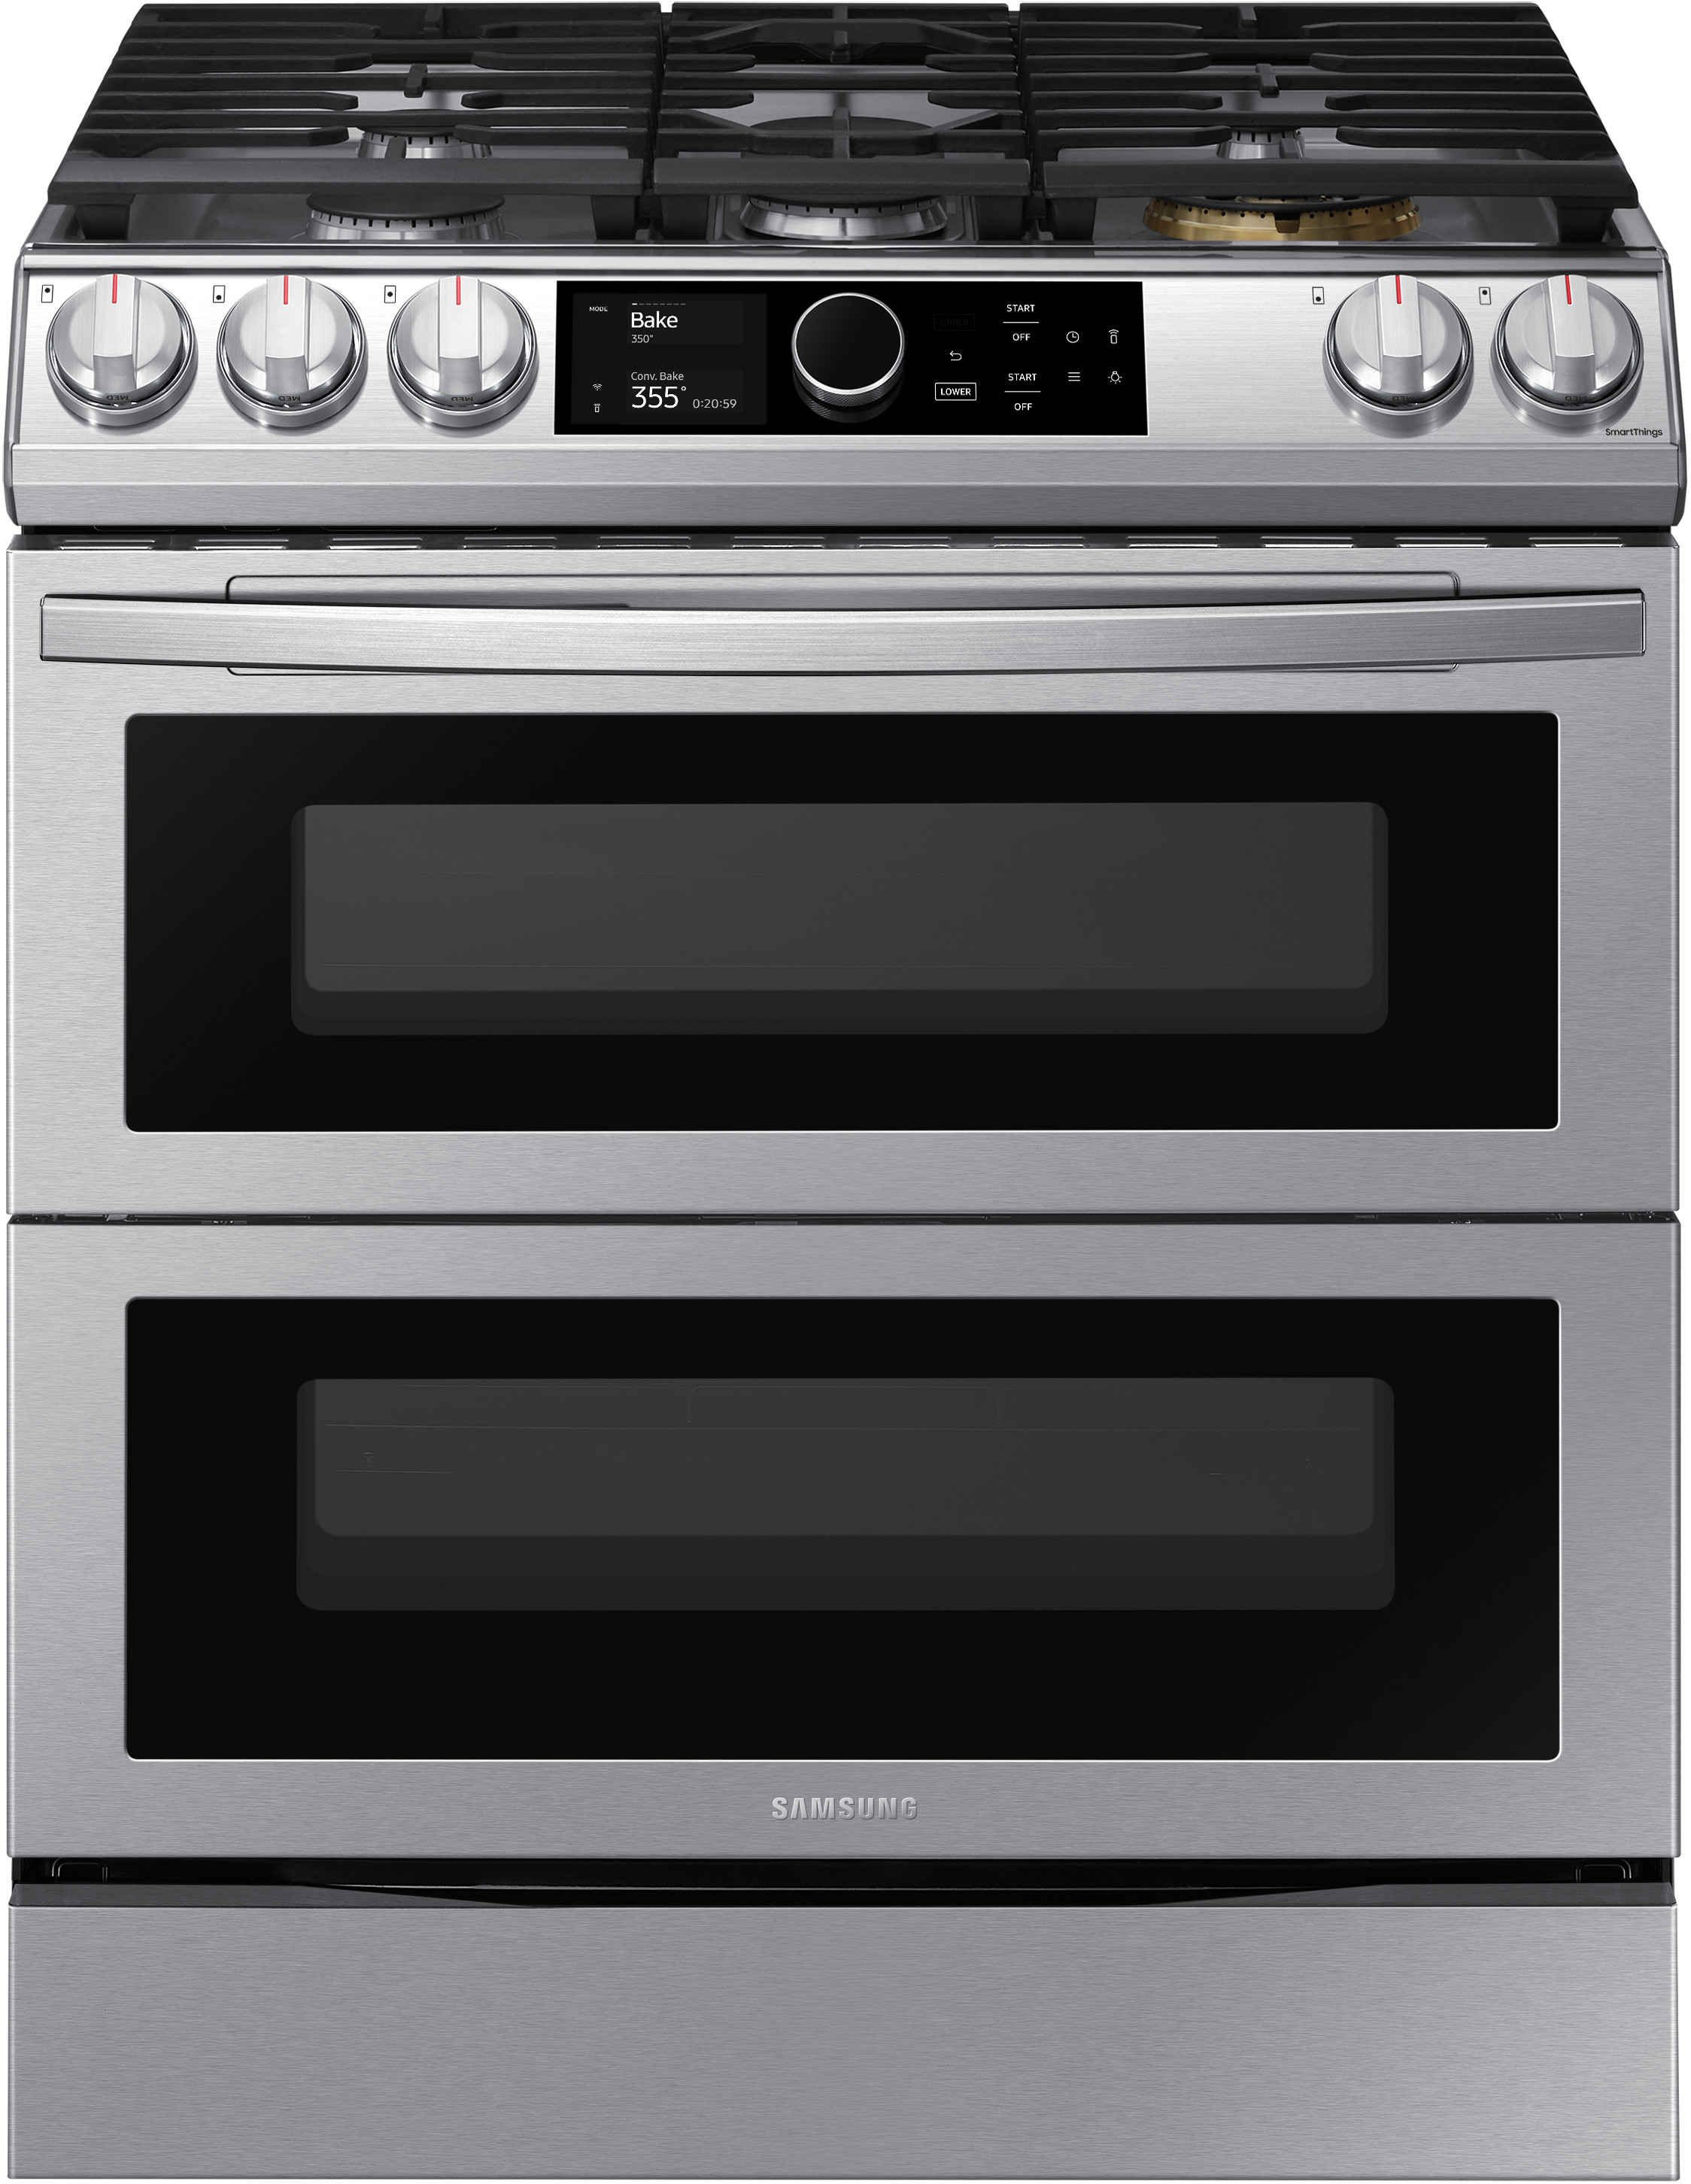 30"" Slide-In Dual Fuel Natural Gas Range - Samsung NY63T8751SS